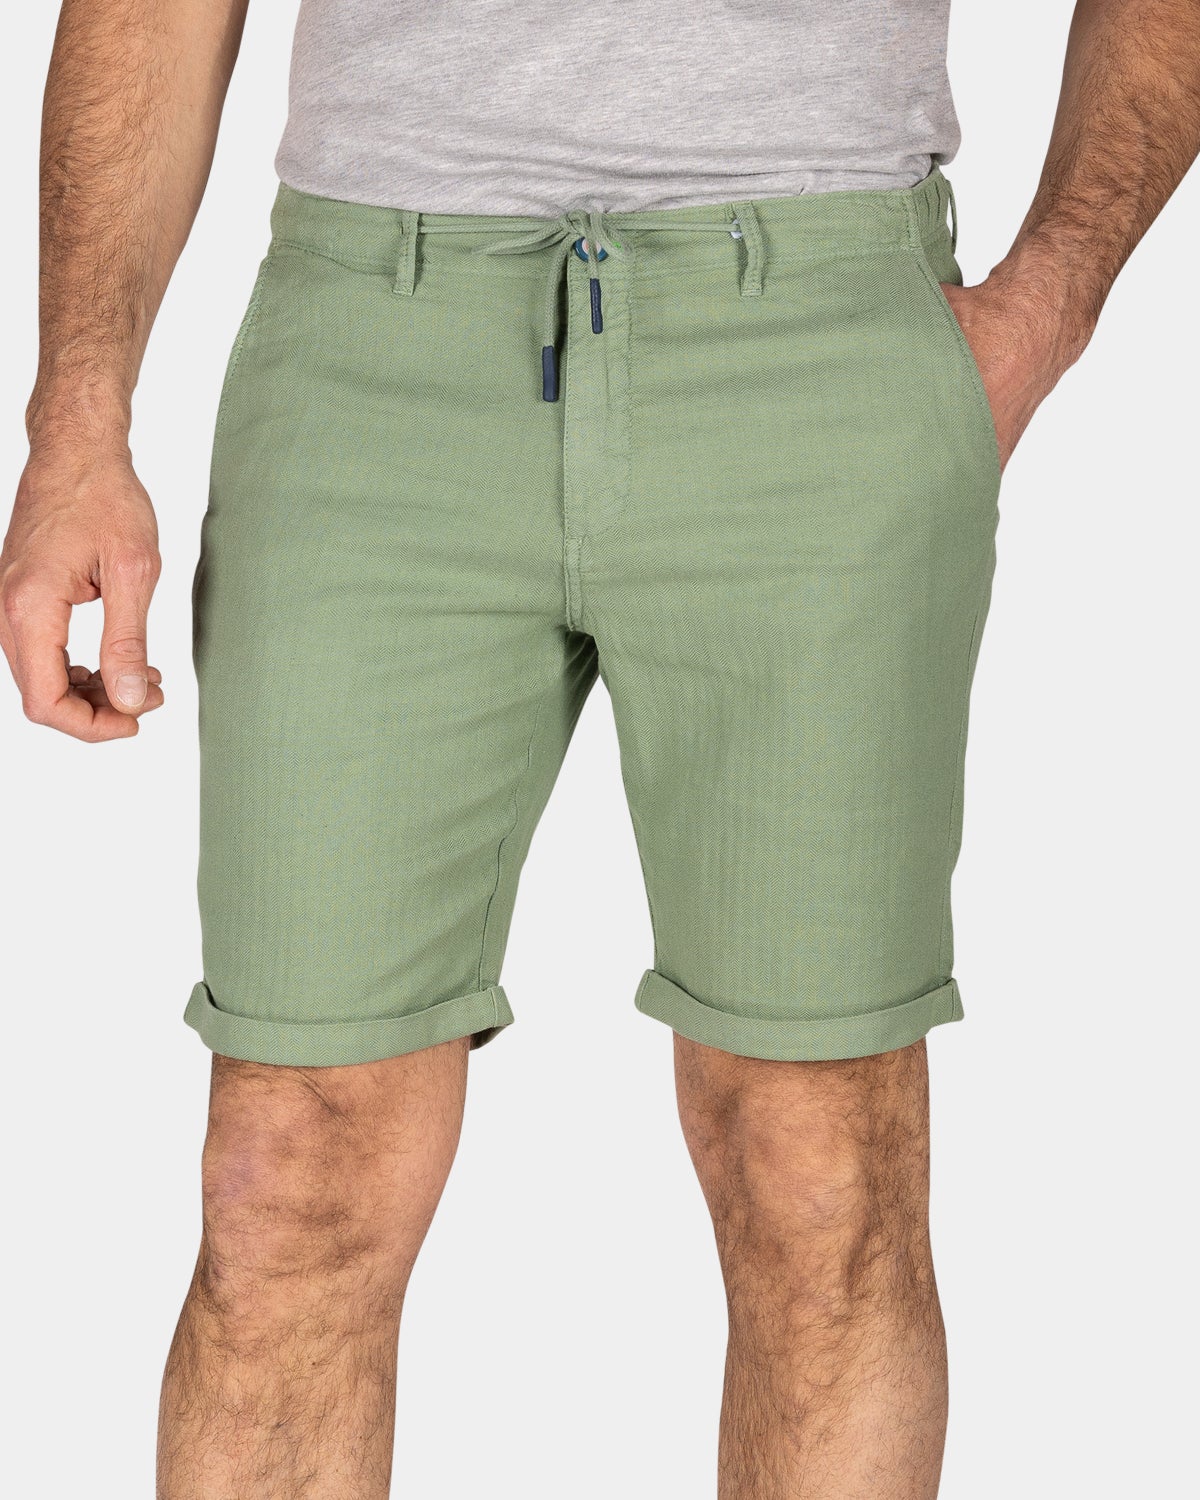 Shorts made of cotton and linen - Soft Olive